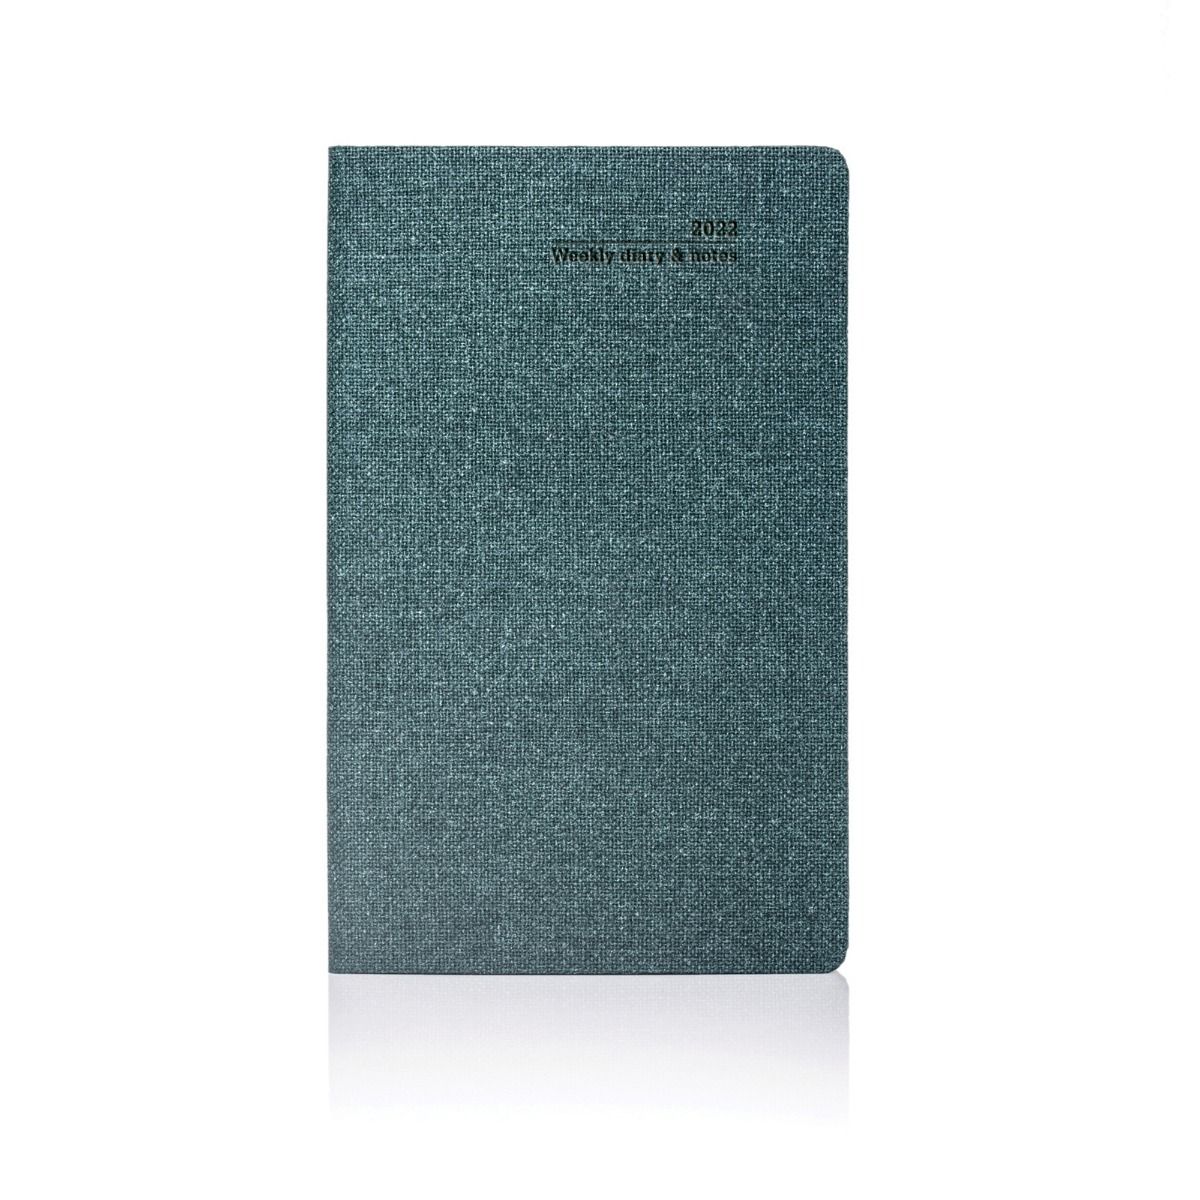 2021-2022 Eco 100% Fully Recyclable Diary A5 Week To View Academic School